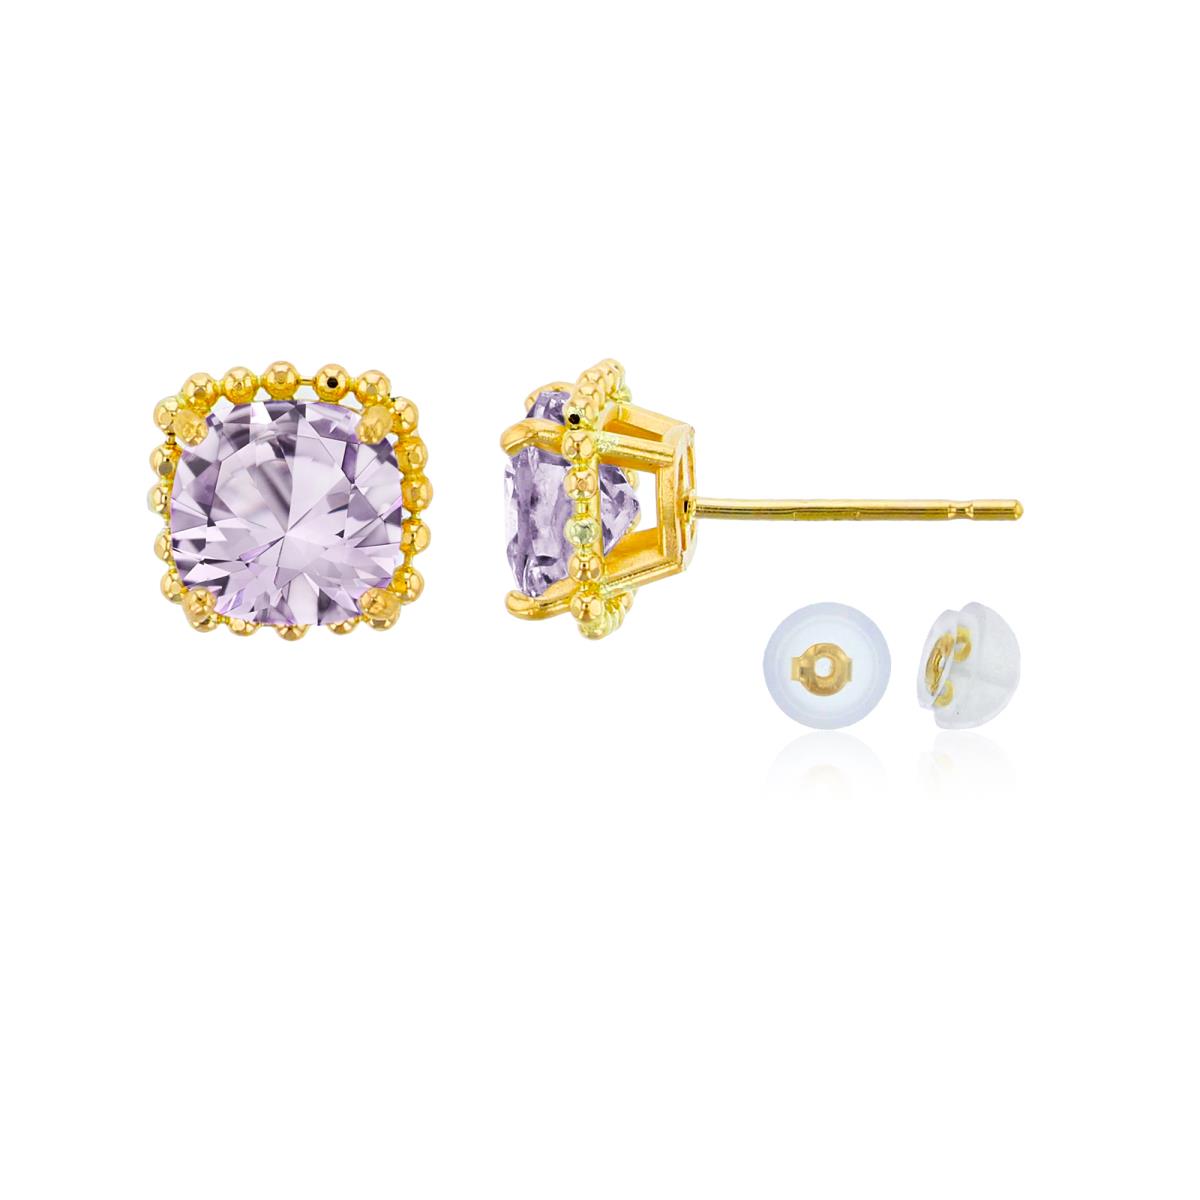 10K Yellow Gold 6x6mm Cushion Cut Rose De France Bead Frame Stud Earring with Silicone Back